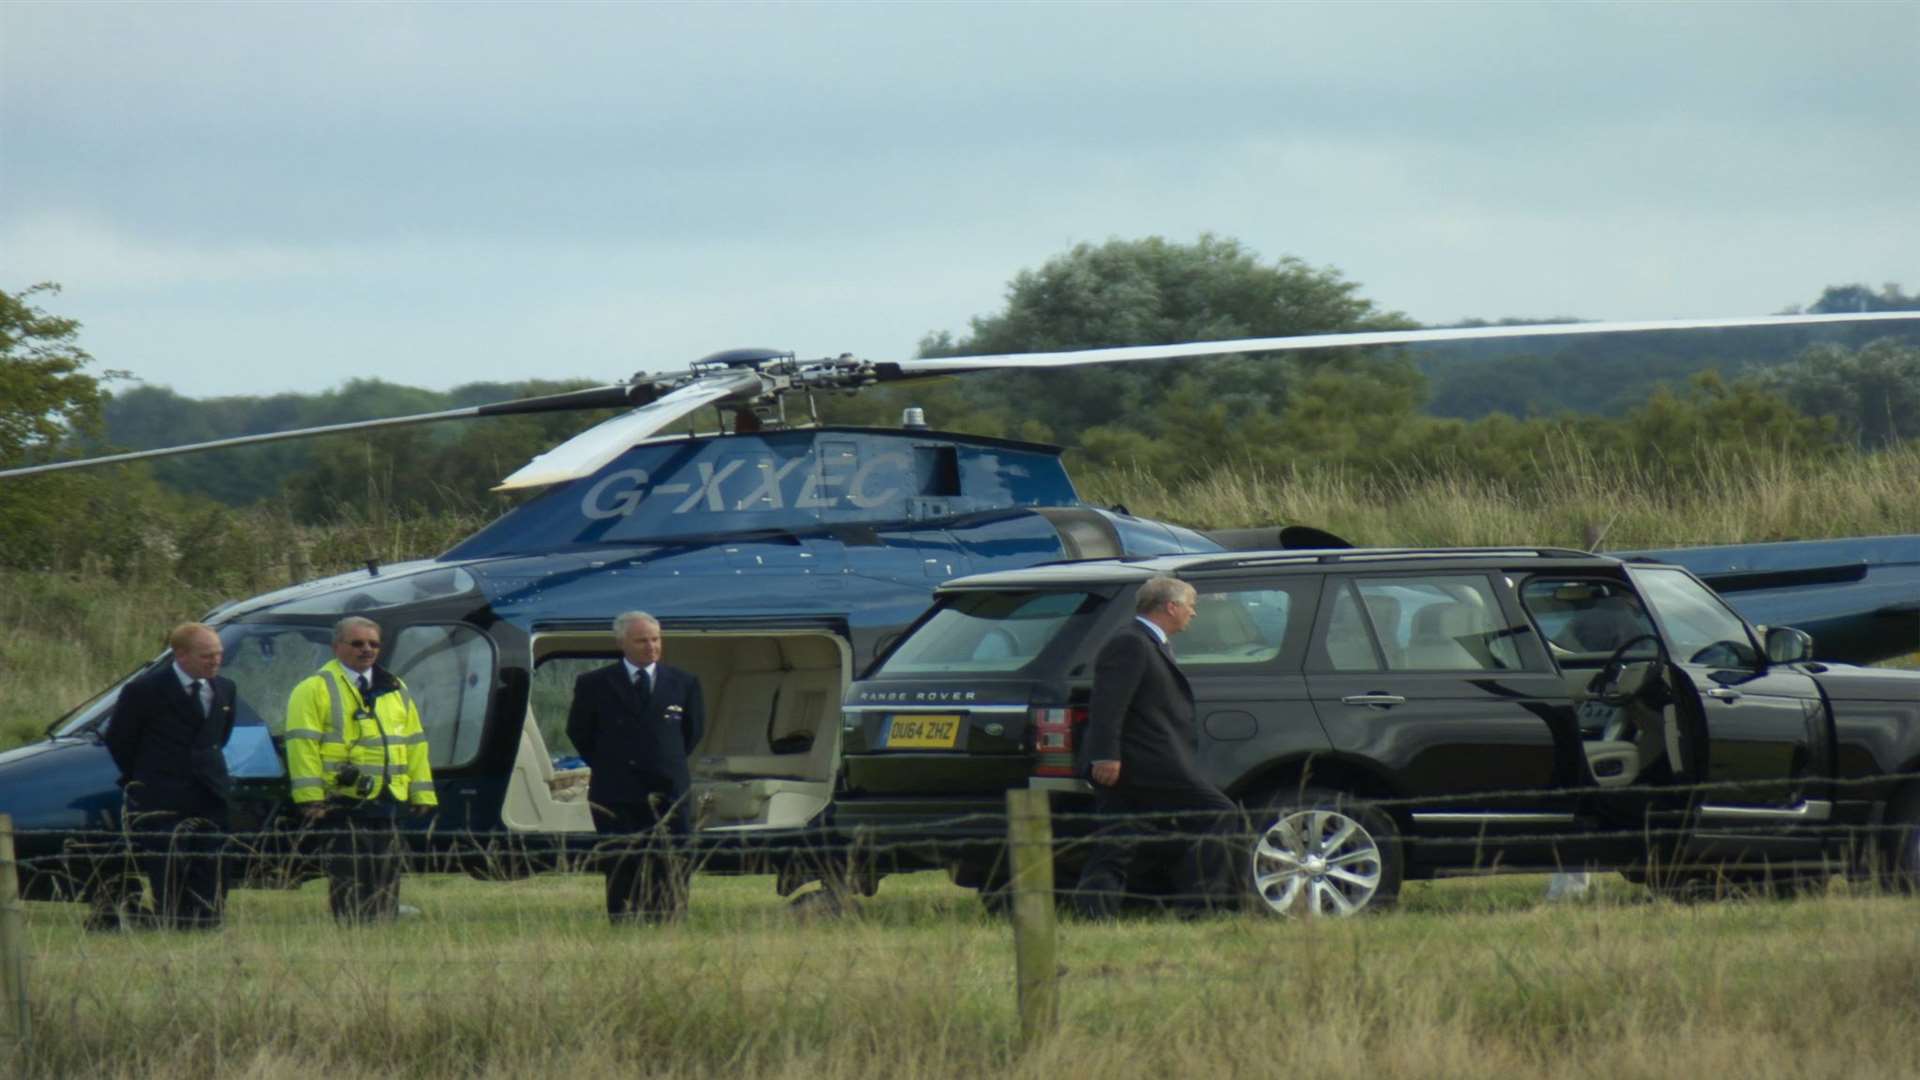 Prince Andrew got out of a helicopter in Sandwich Bay. Picture uploaded to Facebook by Steve Miles